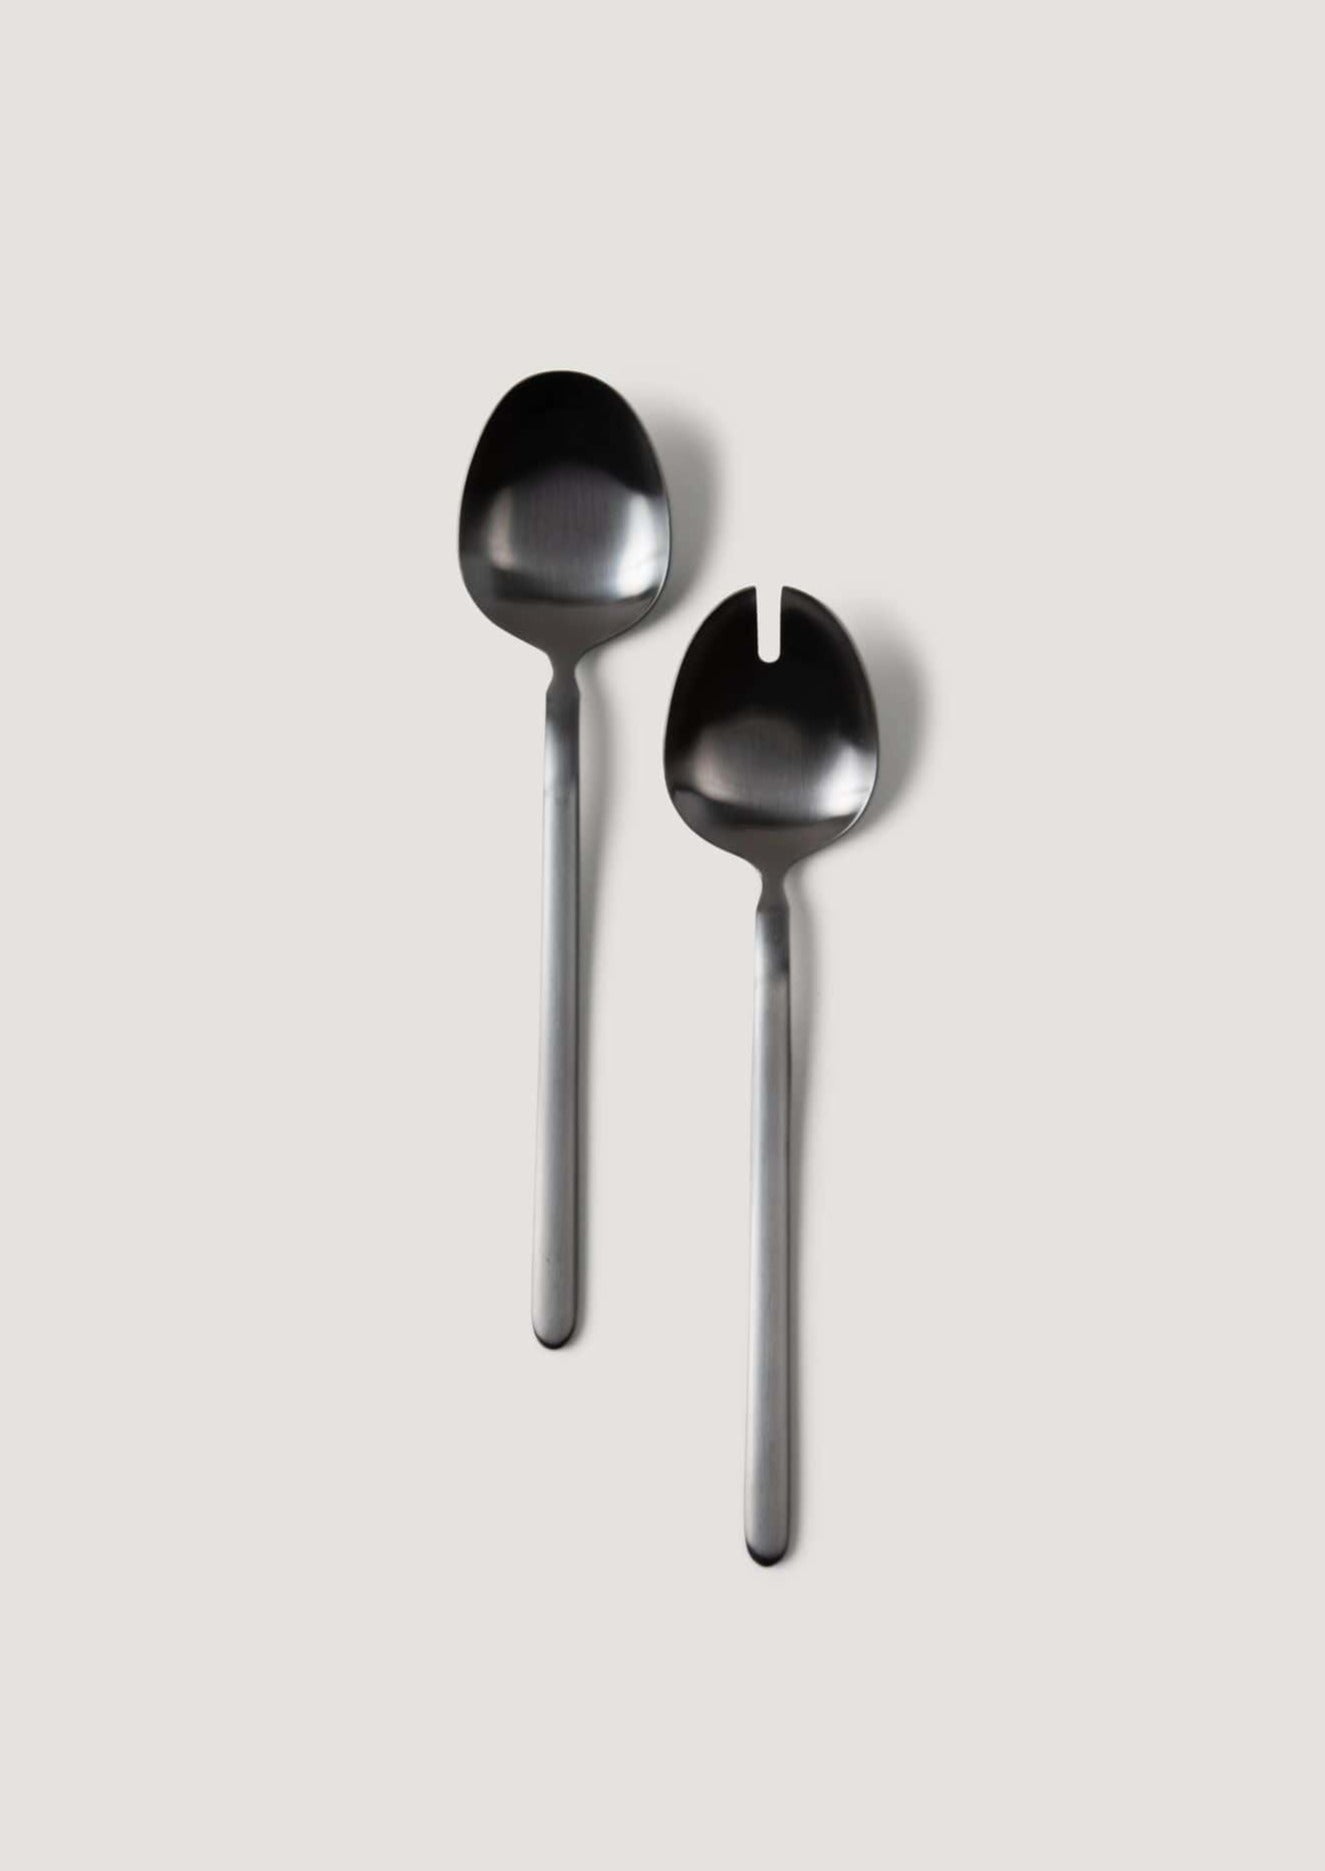 Matte Black Stainless Steel Serving Spoons at Afloral